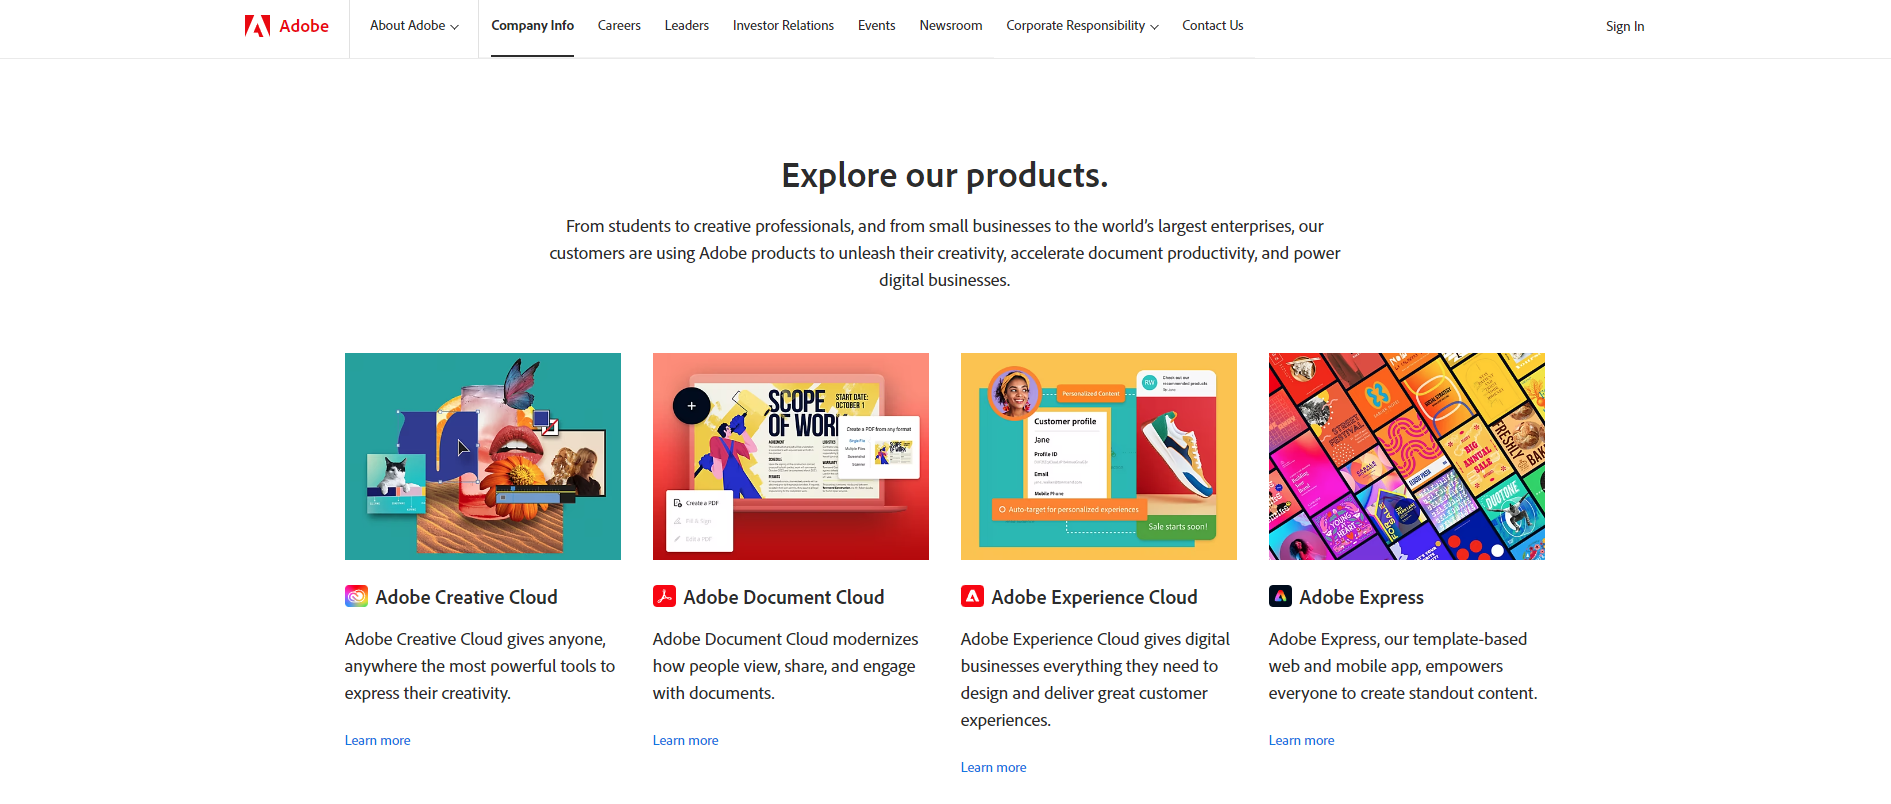 Showcasing Adobe's products